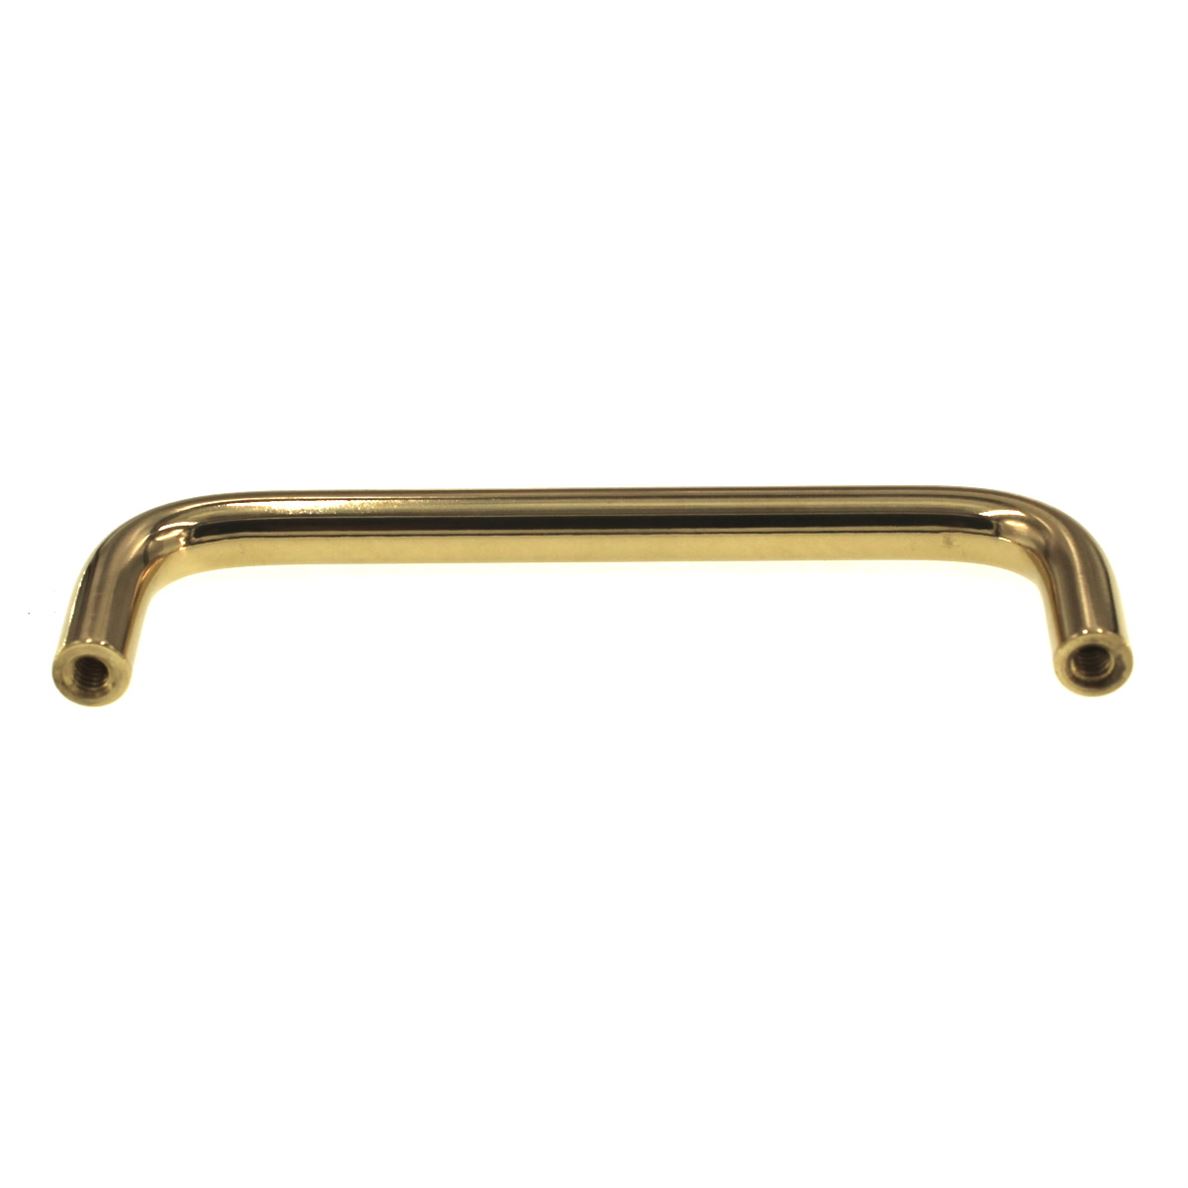 Liberty Polished Brass 3 3/4" (96mm) Ctr. Smooth Cabinet Wire Pull P604B6-PB